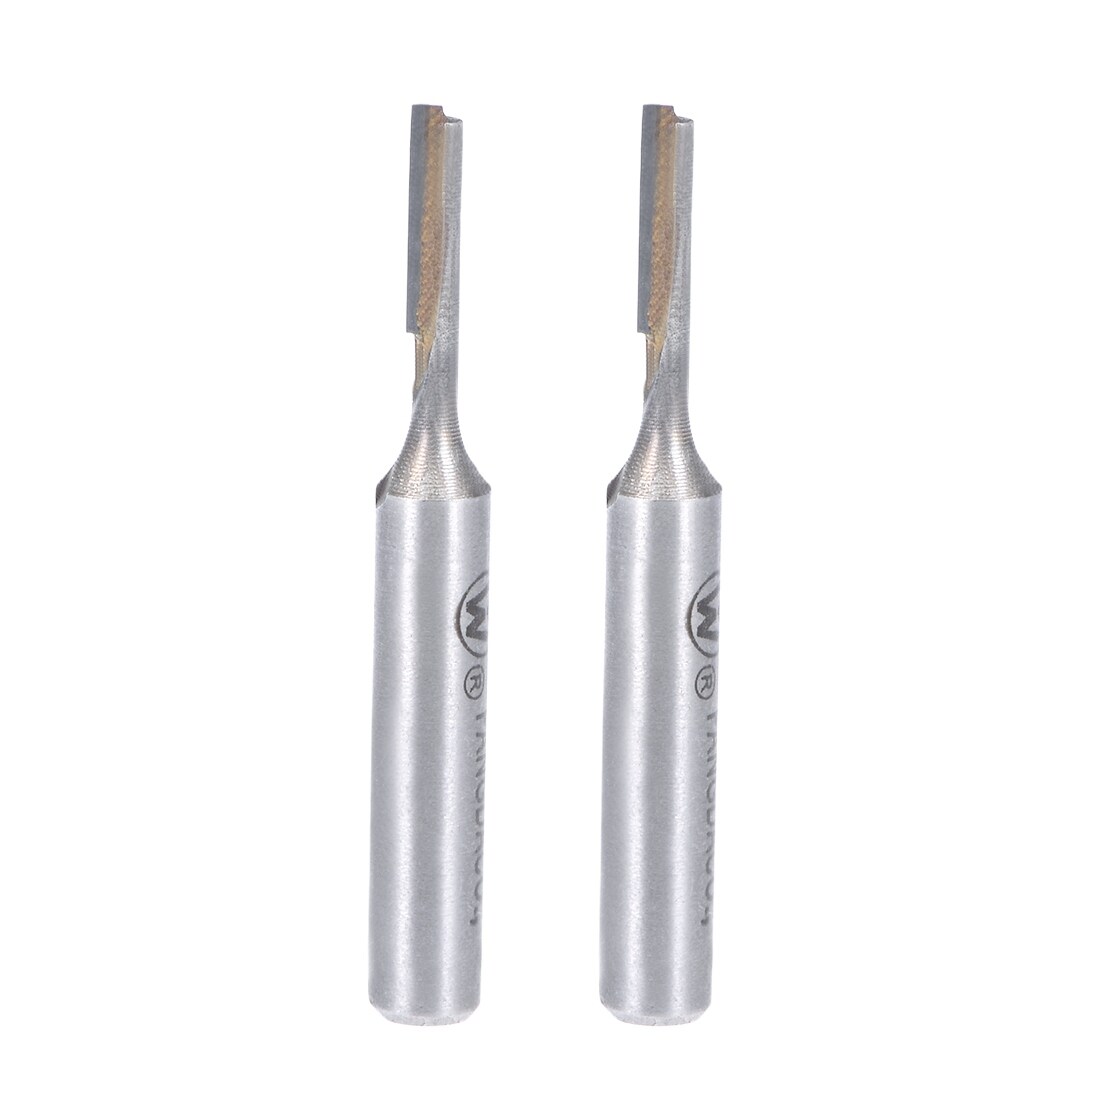 Router bit 1/4 Shank 1/4 inch Cutting Diameter 2 HSS Straight Flutes for milling Cutting Tool for Carpentry 